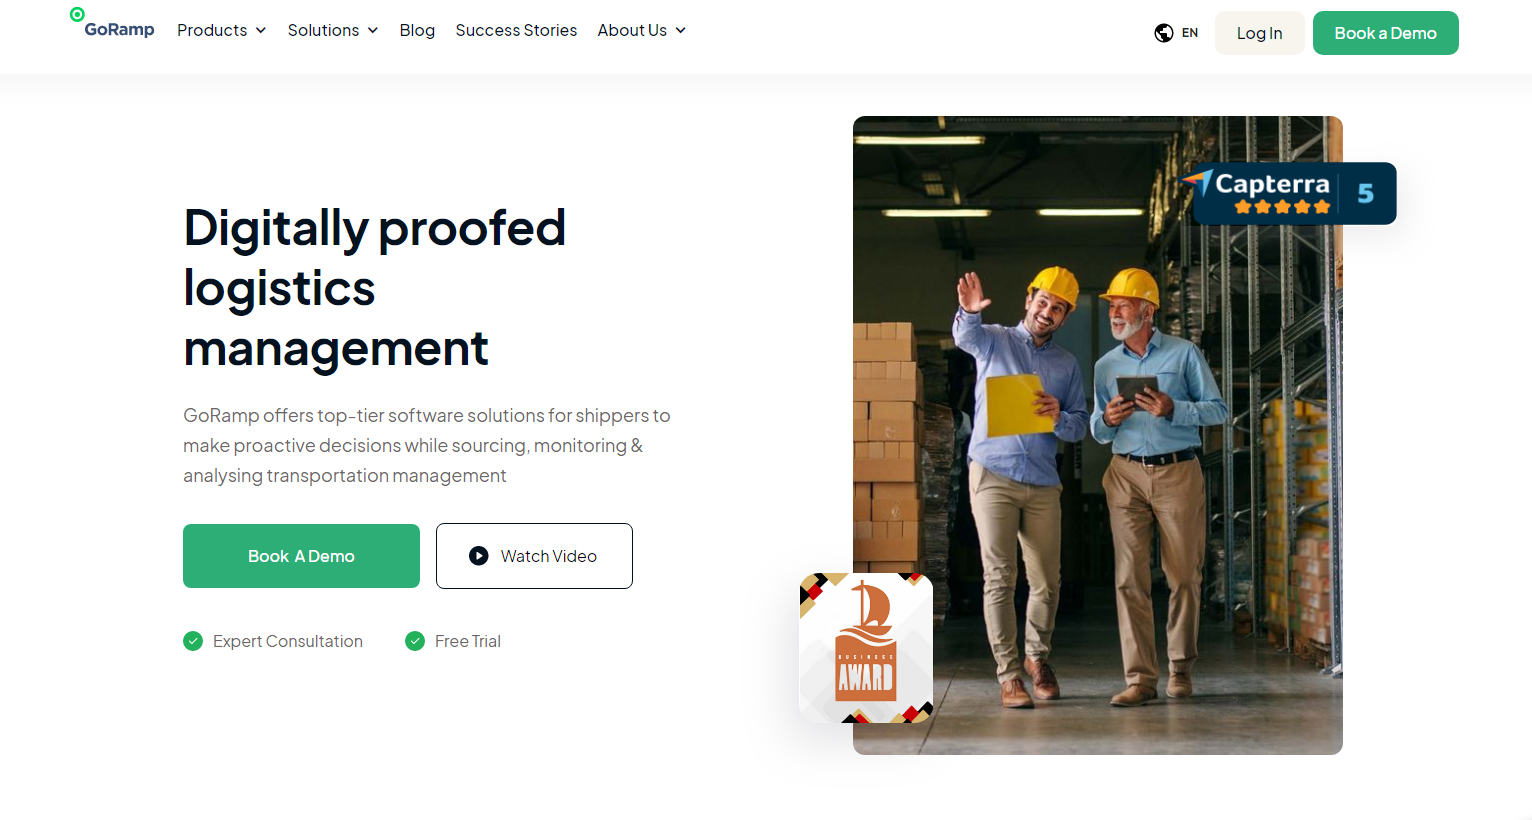 GoRamp Secures $3.3 Million in Funding from Startup Wise Guys and Presto Ventures